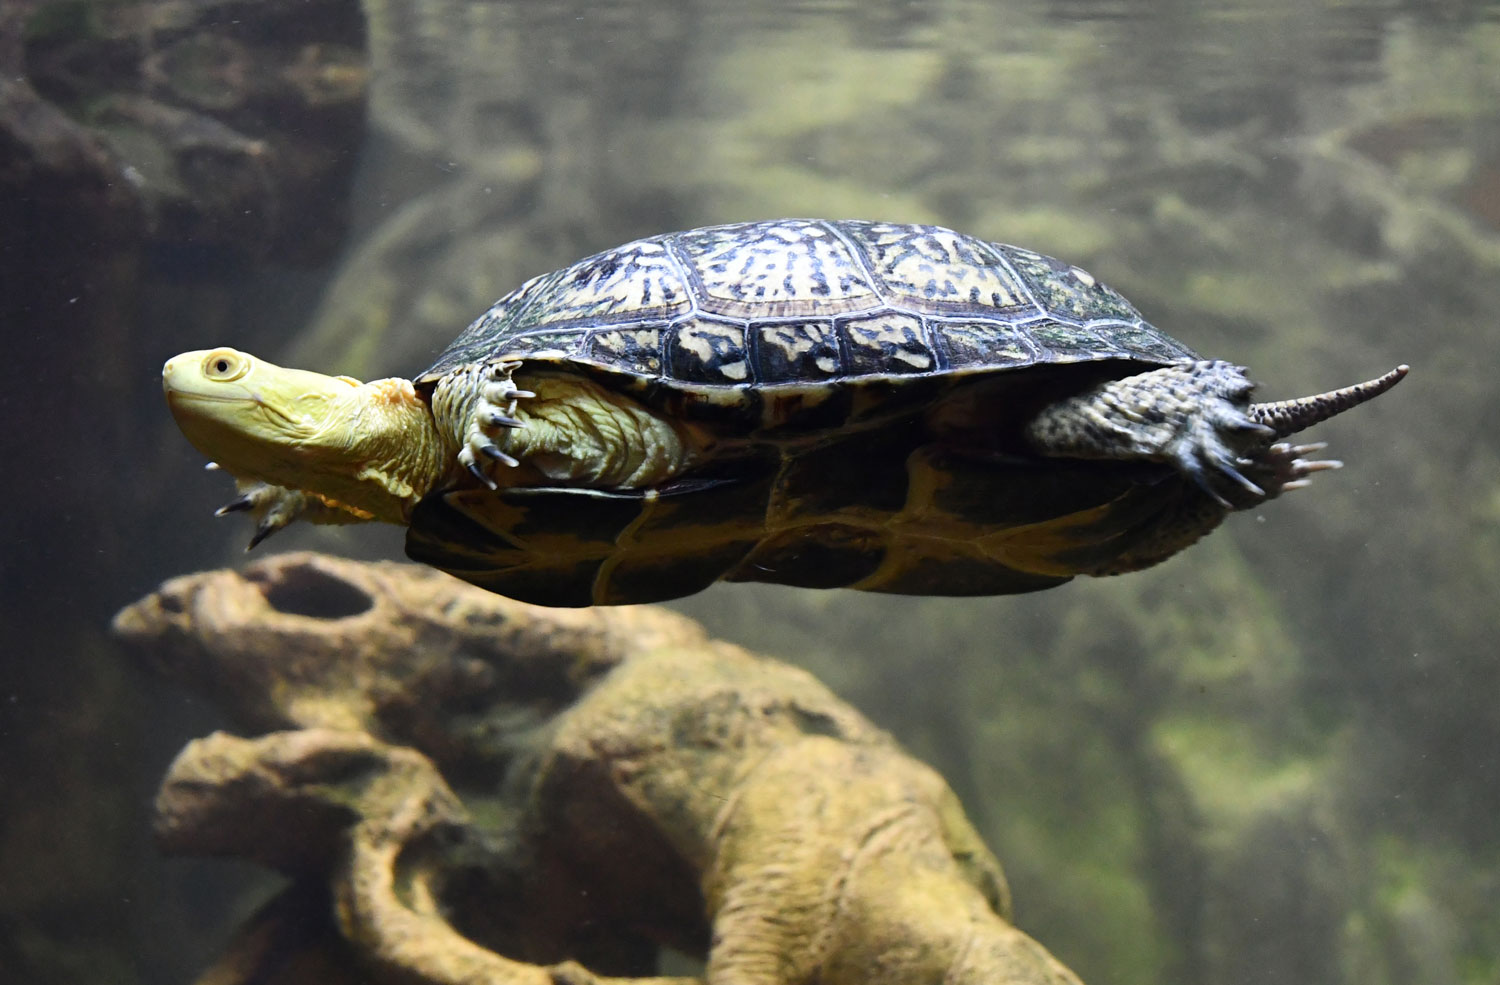 A Blanding's turtle swimming in water in a tank.